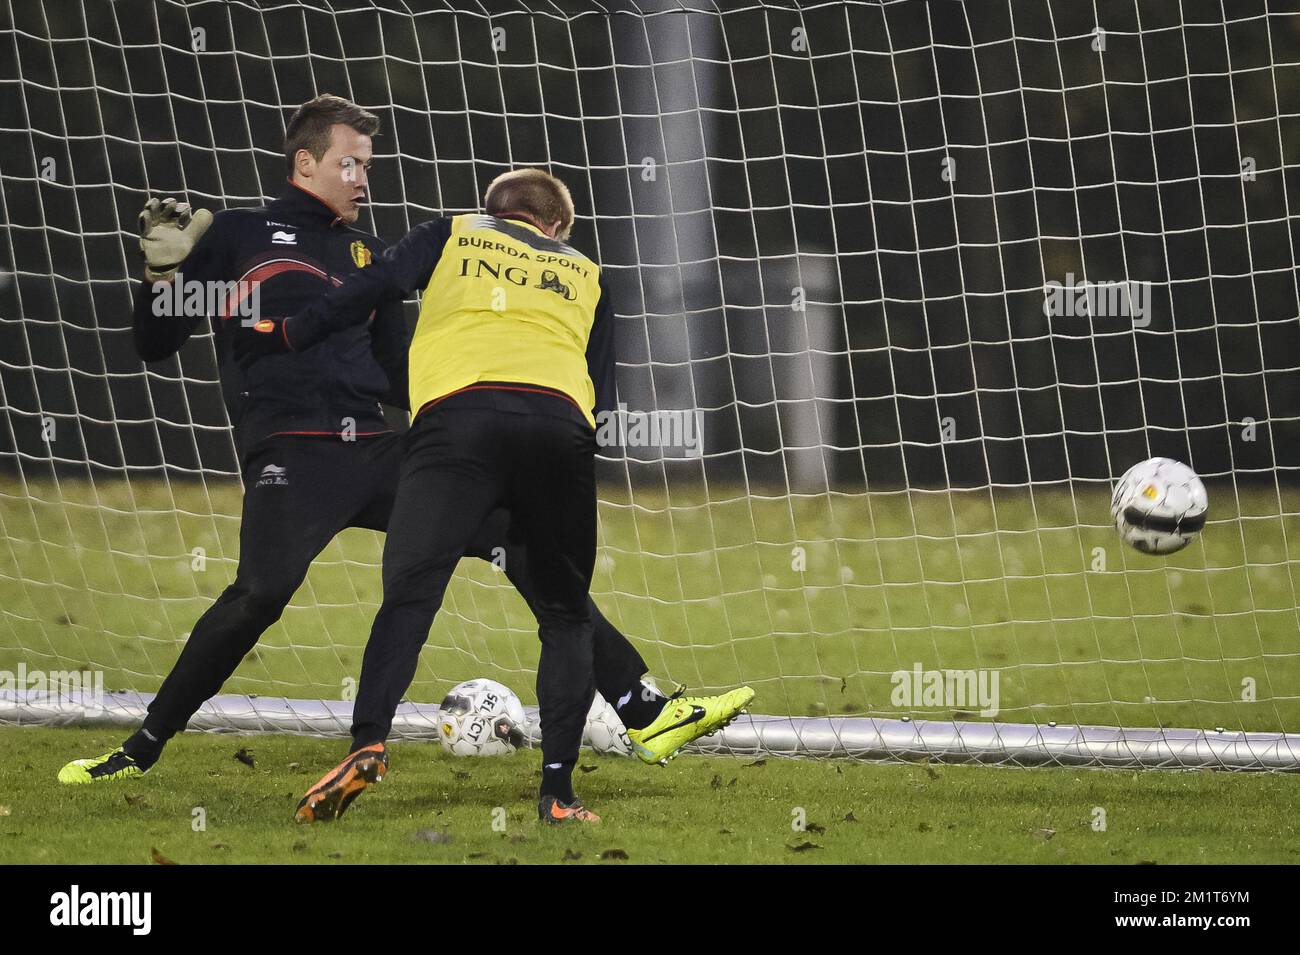 20131117 - BRUSSELS, BELGIUM: Belgium's goalkeeper Simon Mignolet in action during a training session of Belgian national soccer team Red Devils in Brussels, on Sunday 17 November 2013. Last Thursday they played Colombia and they will play Japan on November 19th in friendly games. BELGA PHOTO LAURIE DIEFFEMBACQ Stock Photo